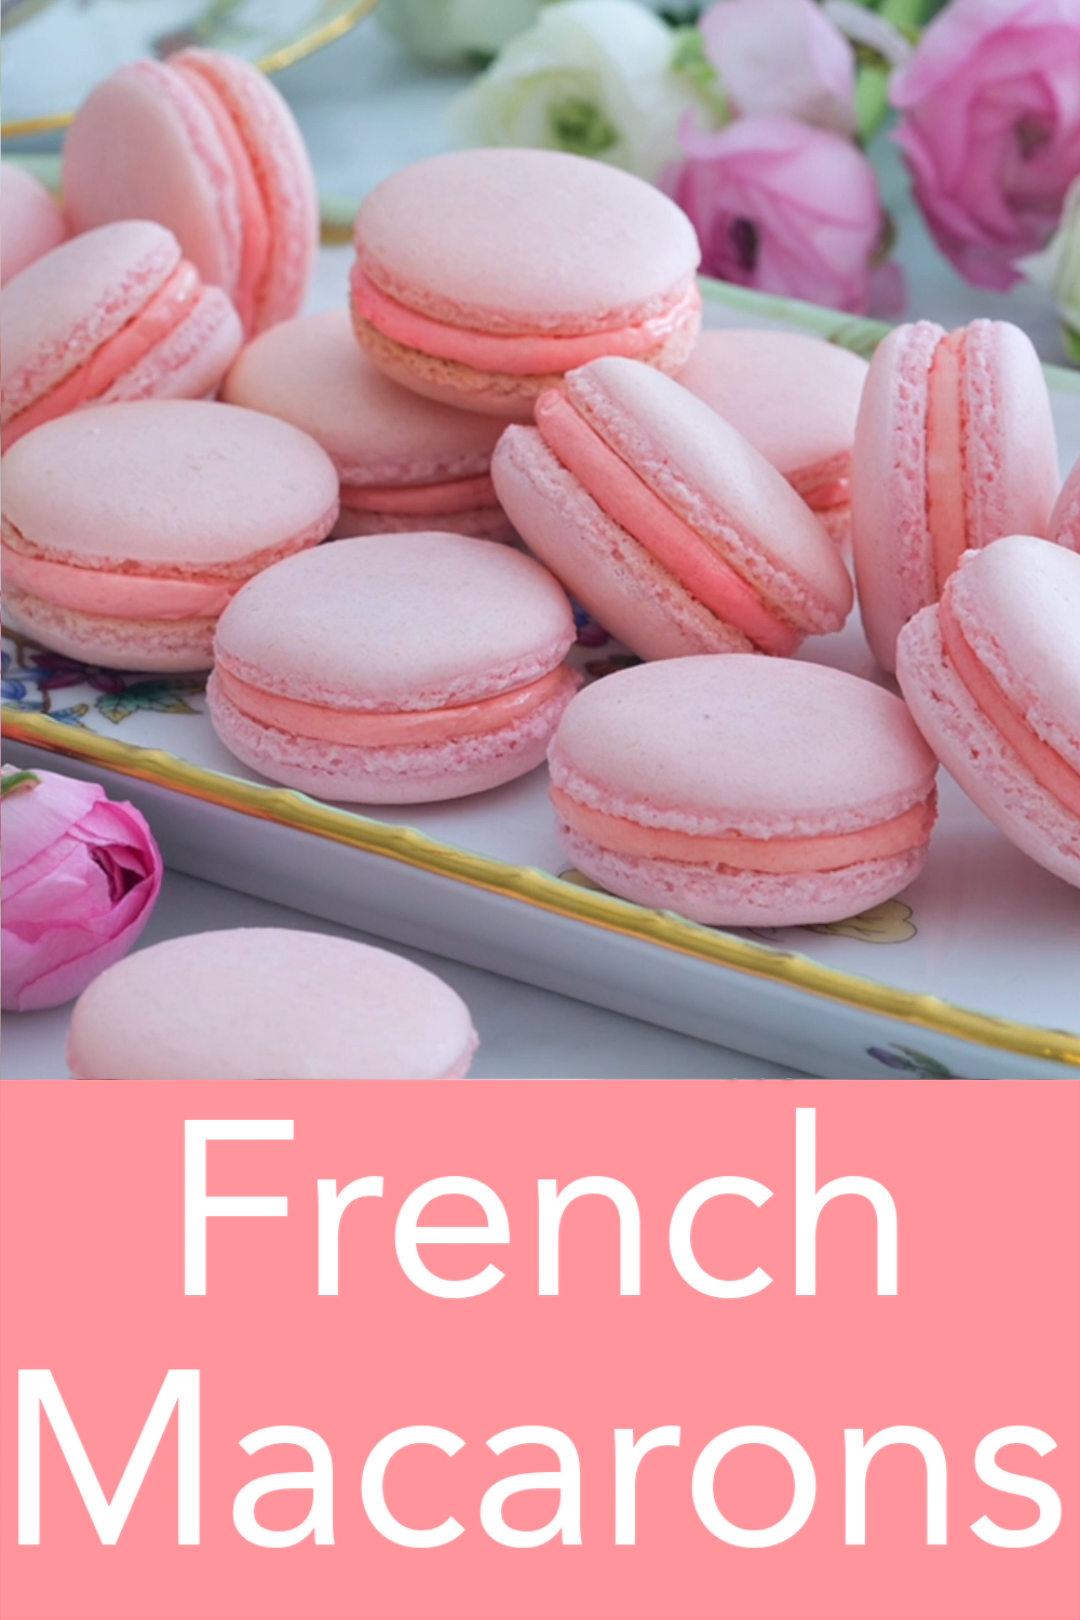 Perfect French Macarons -   14 desserts French treats ideas